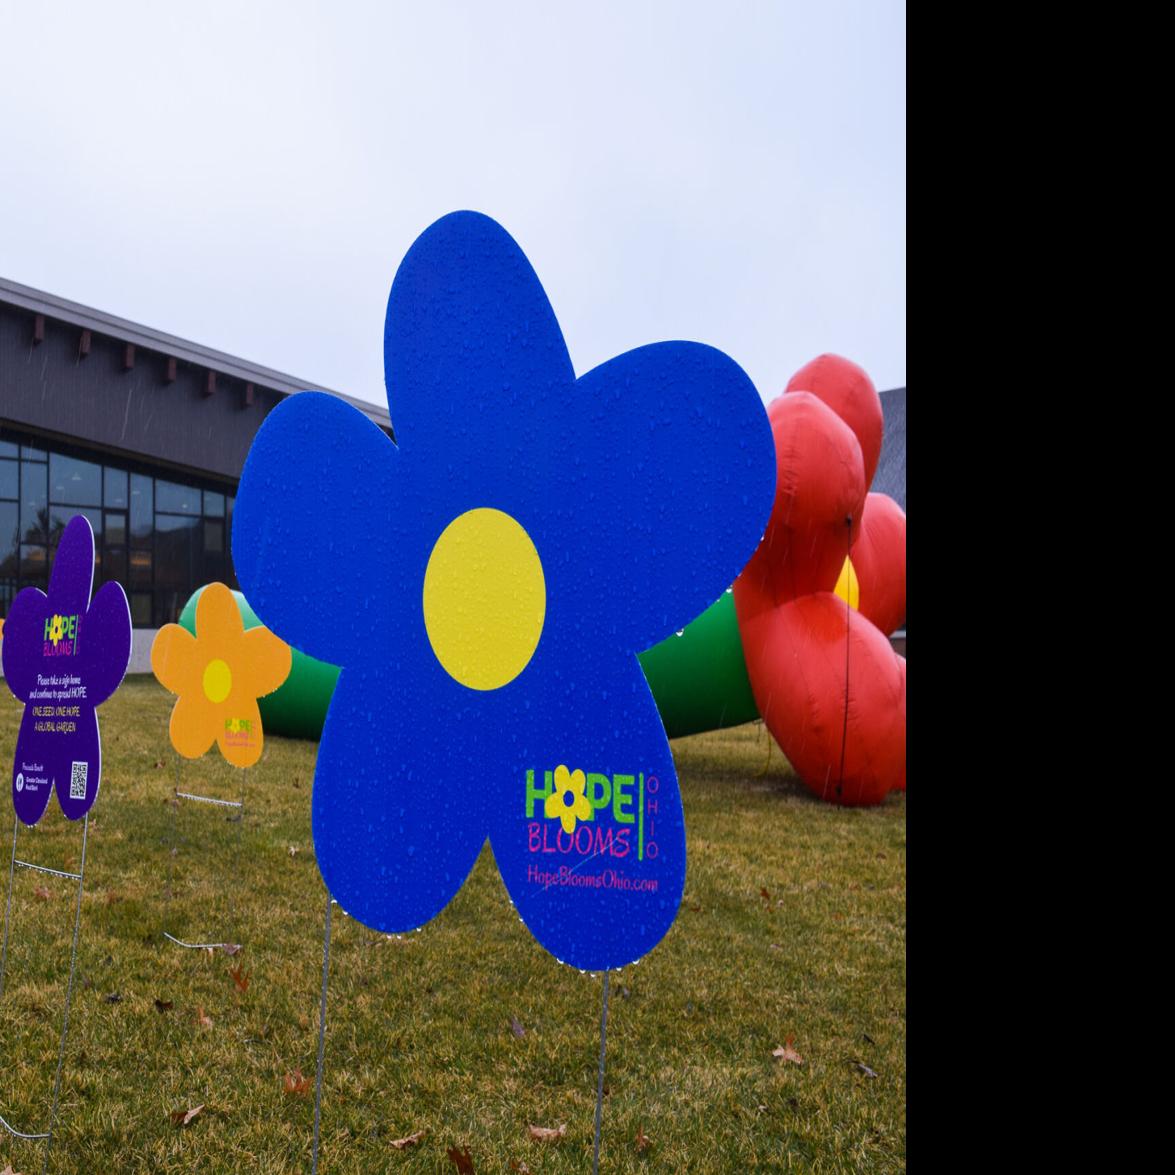 Hope Blooms Ohio coming to Cuyahoga Falls